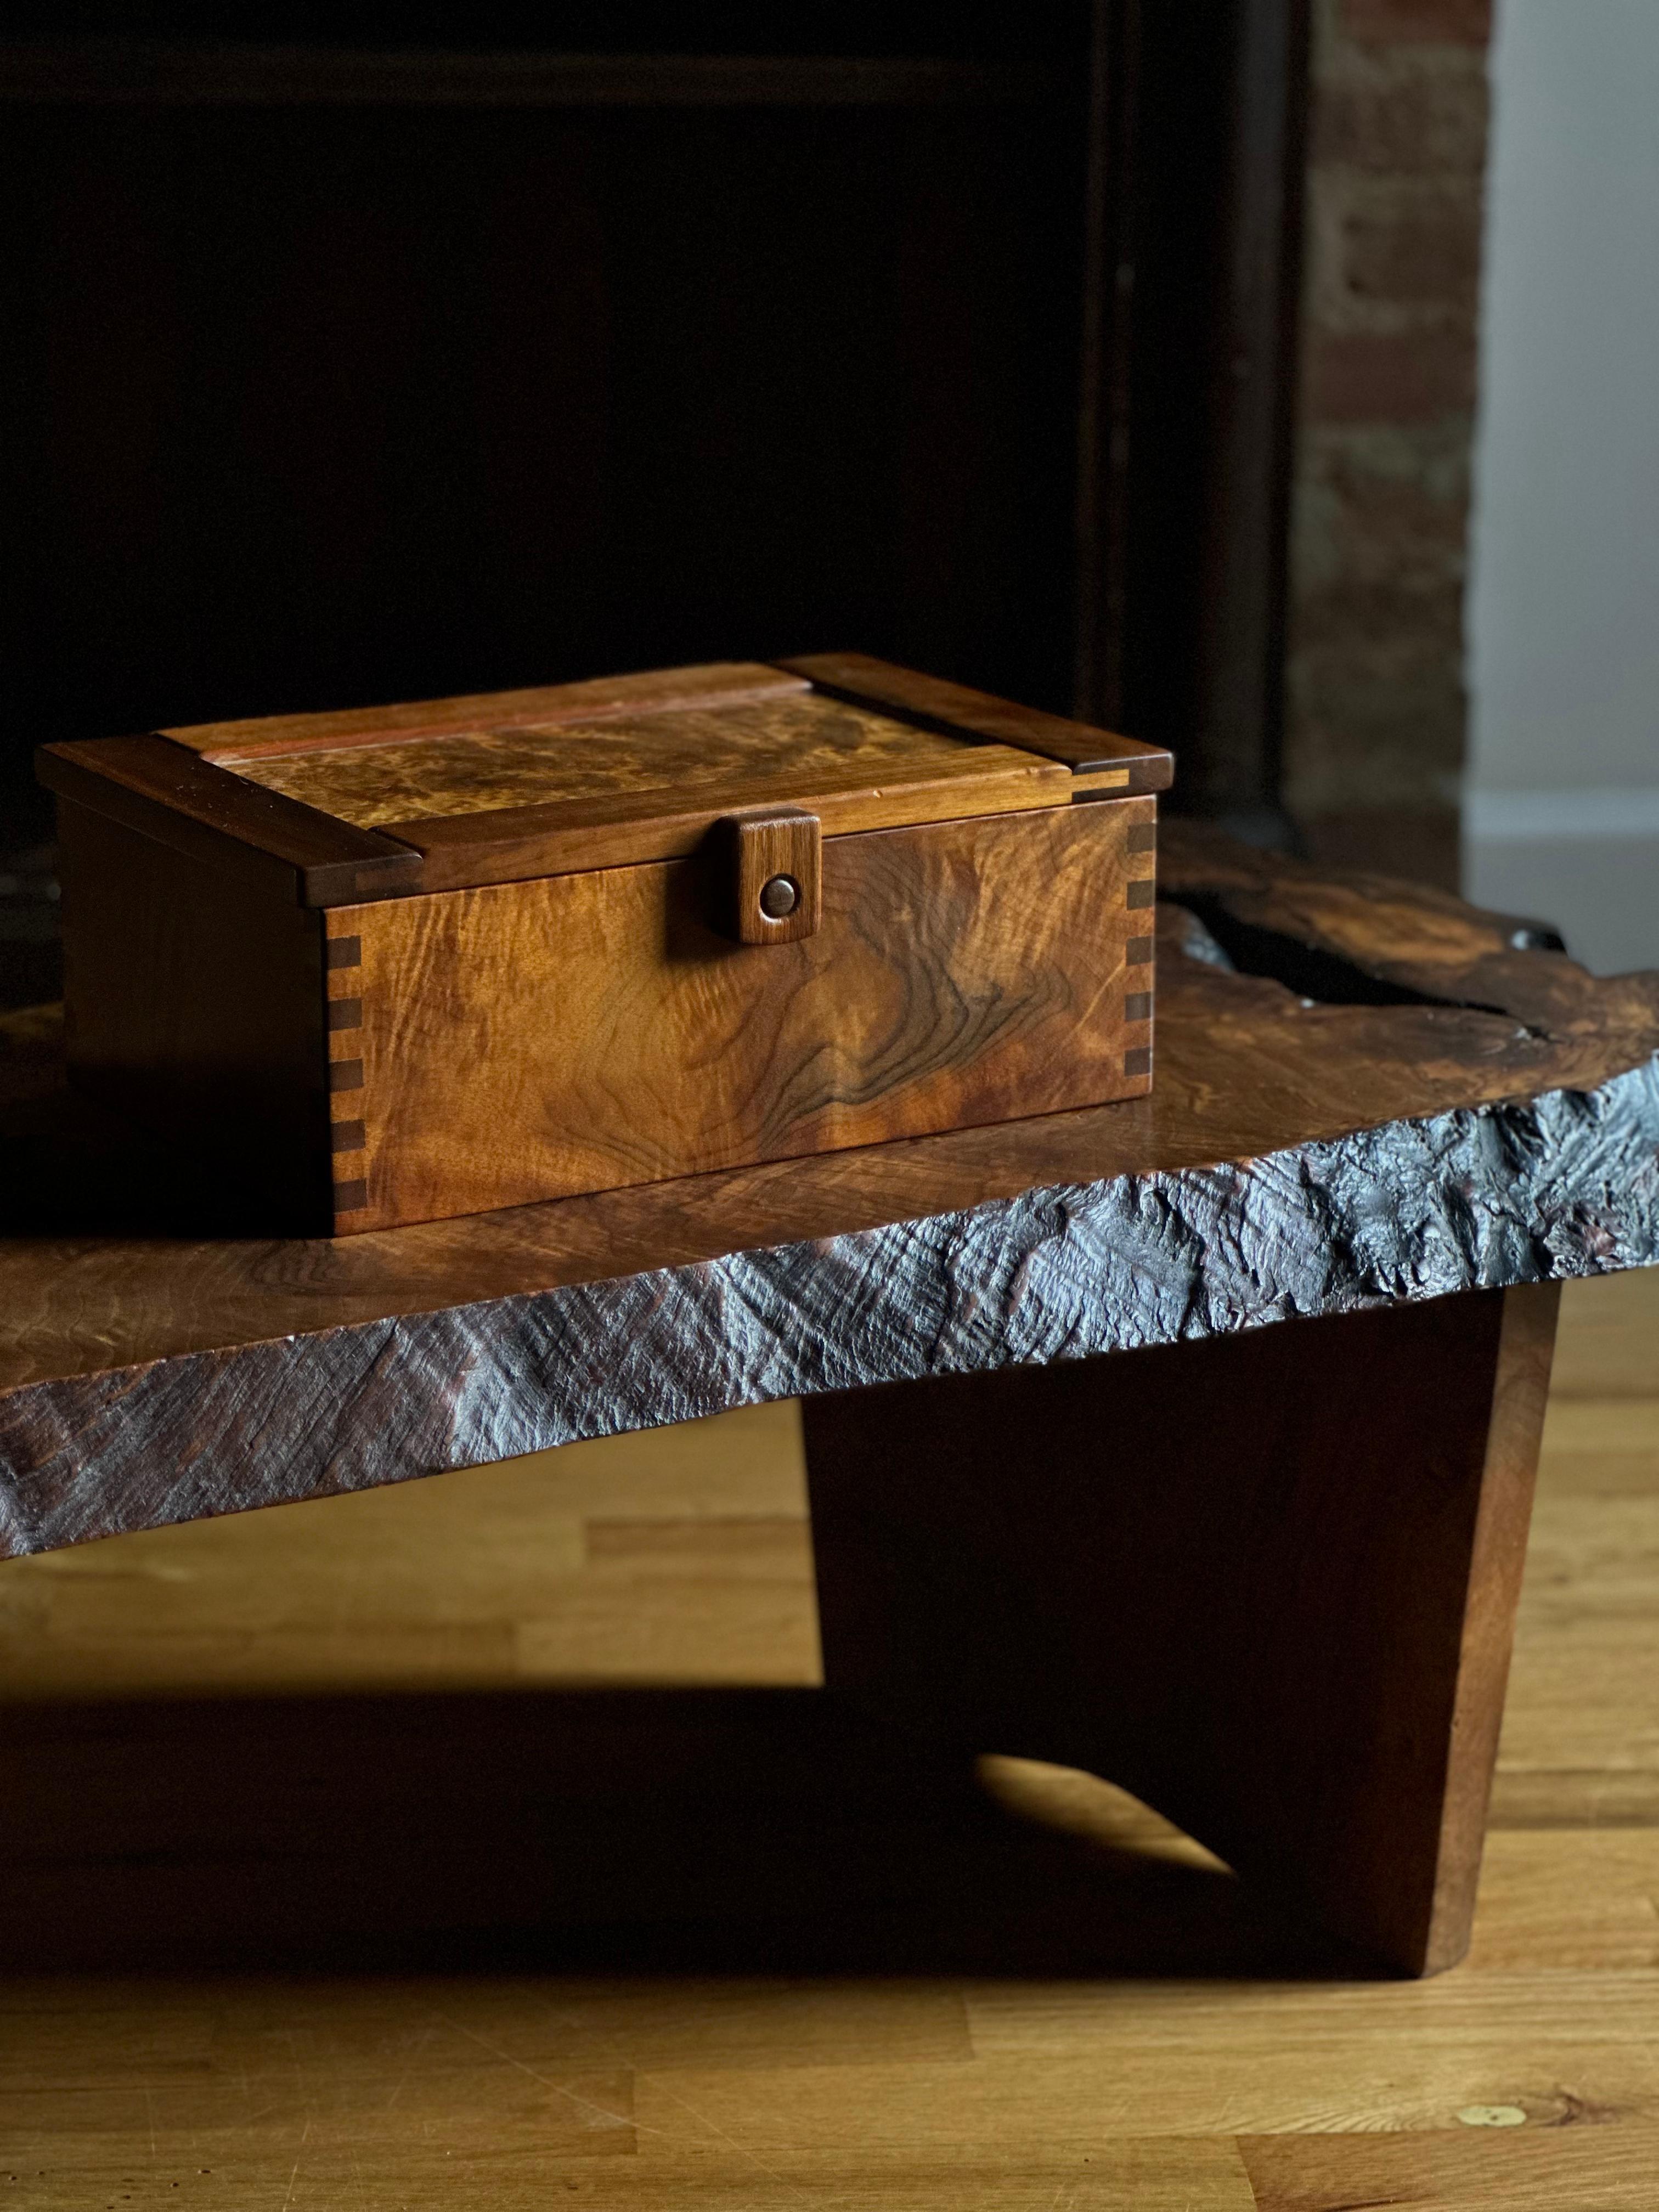 A rectangular box in satin-finished walnut and bird's-eye maple with dovetailing to both body and lid, large wood hinges, and a spring-loaded button closure. Aside from what seem the artist's carved initials 